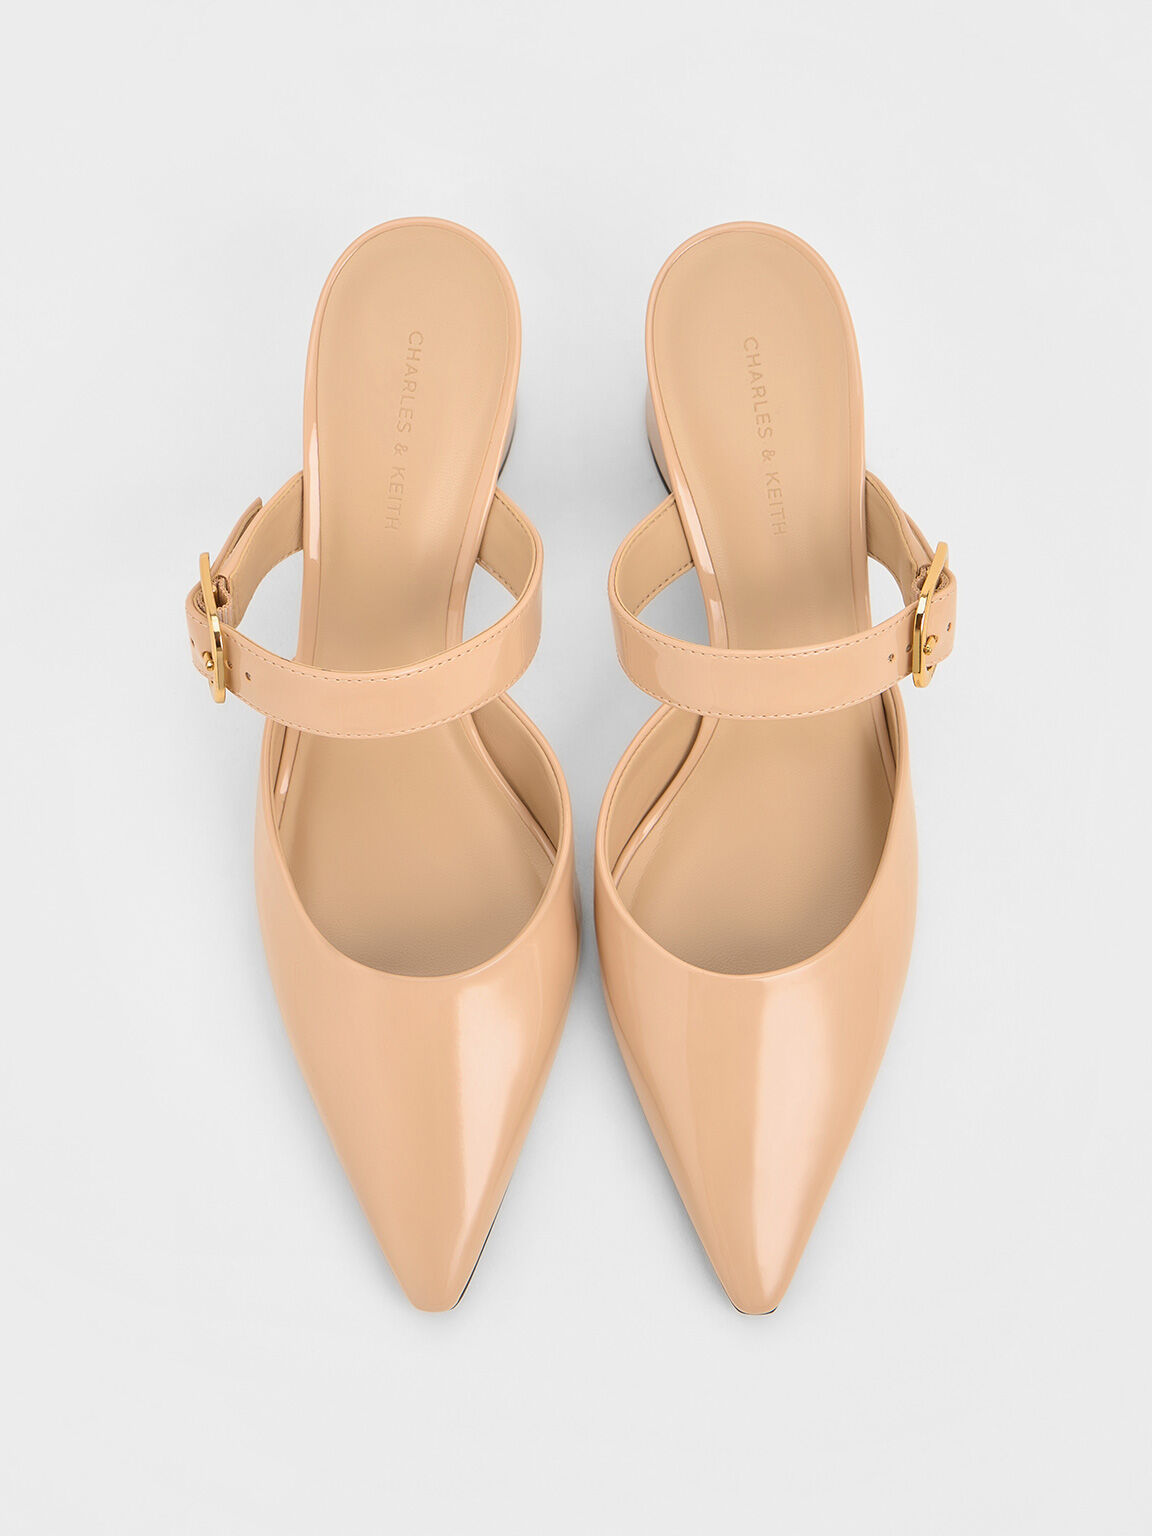 Giày mules cao gót mũi nhọn Patent Pointed-Toe Mary Jane, Nude, hi-res